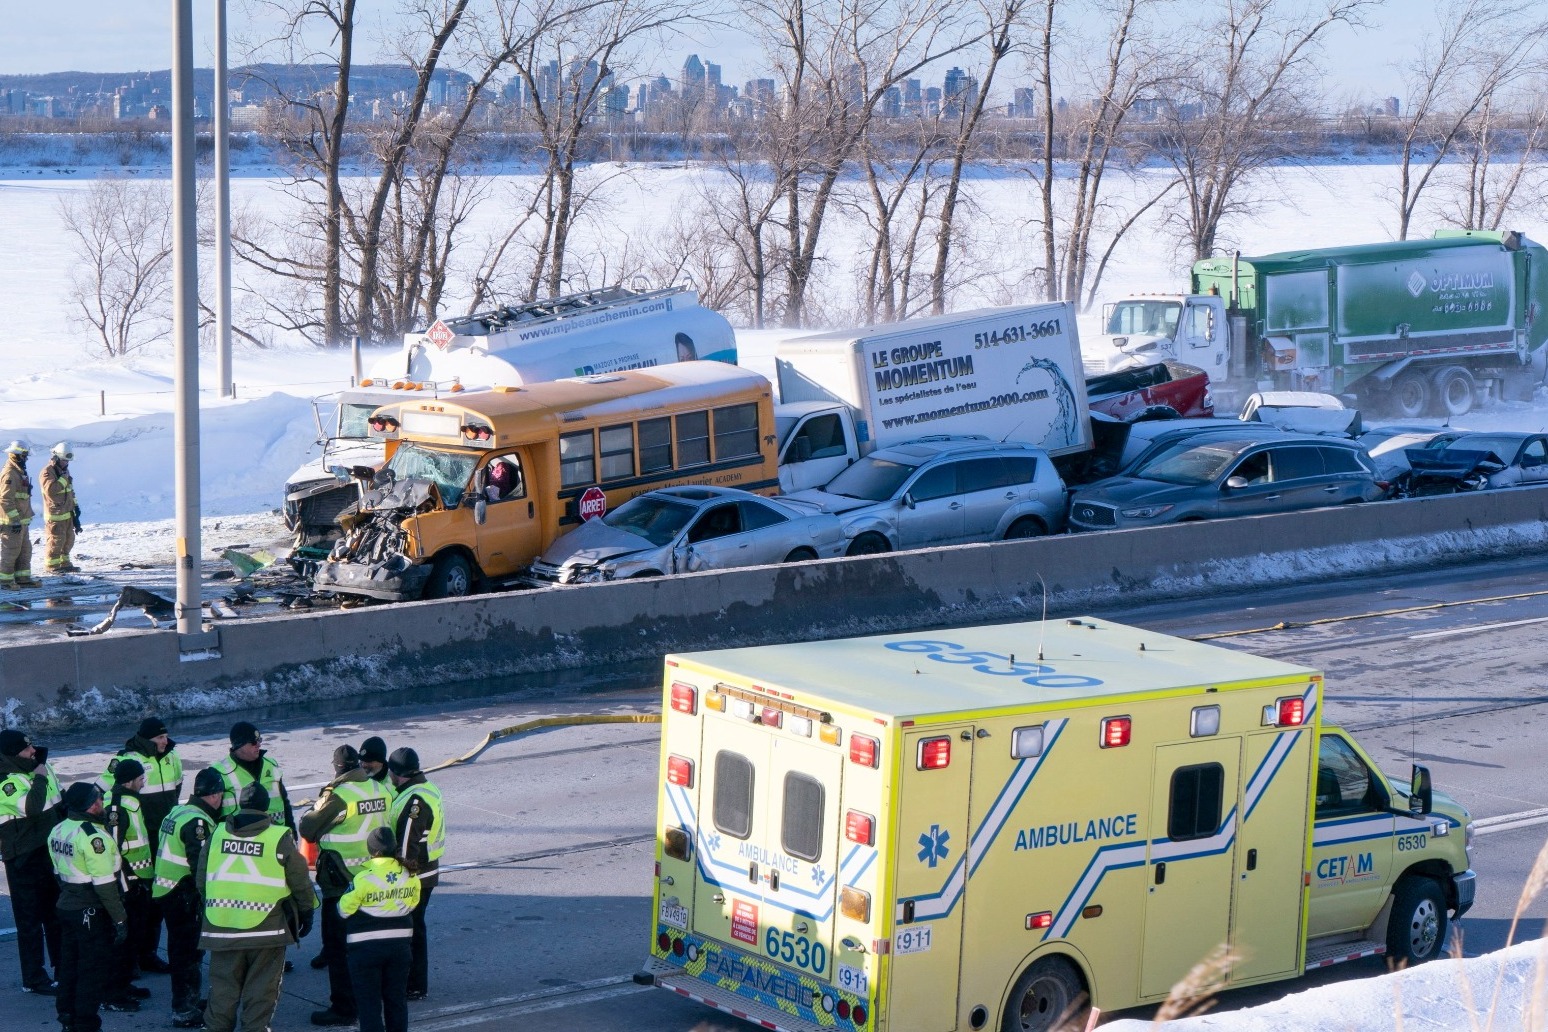 Blizzard-like conditions cause 200 vehicle pile-up in Canada 